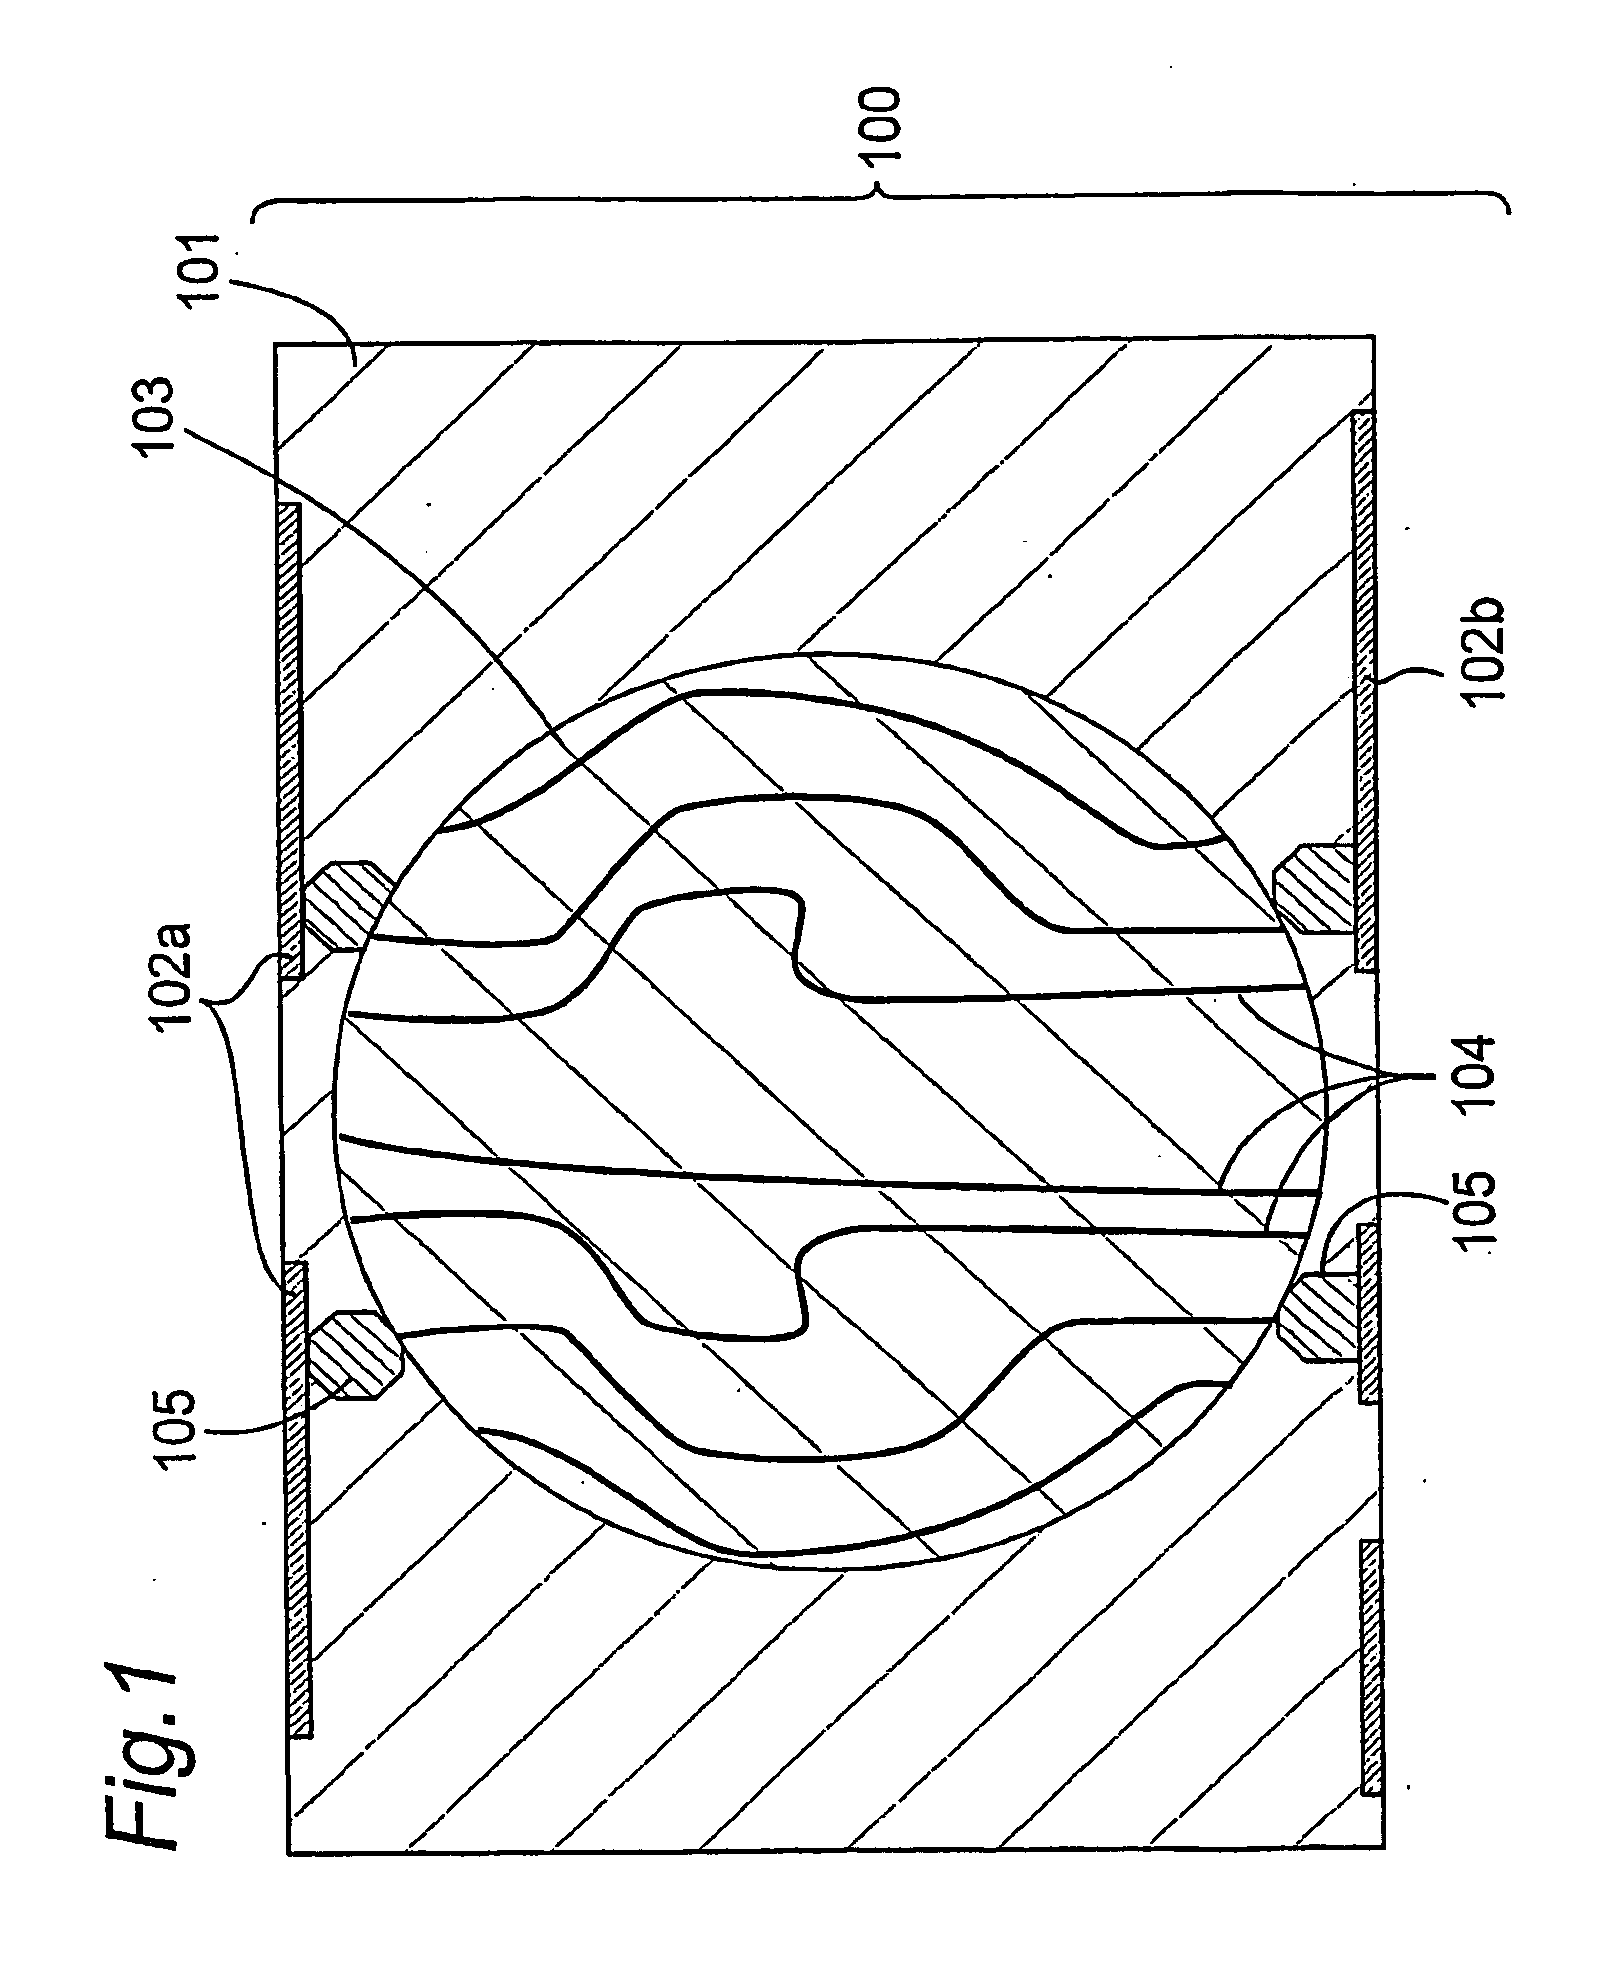 Wiring board embedded with spherical semiconductor element